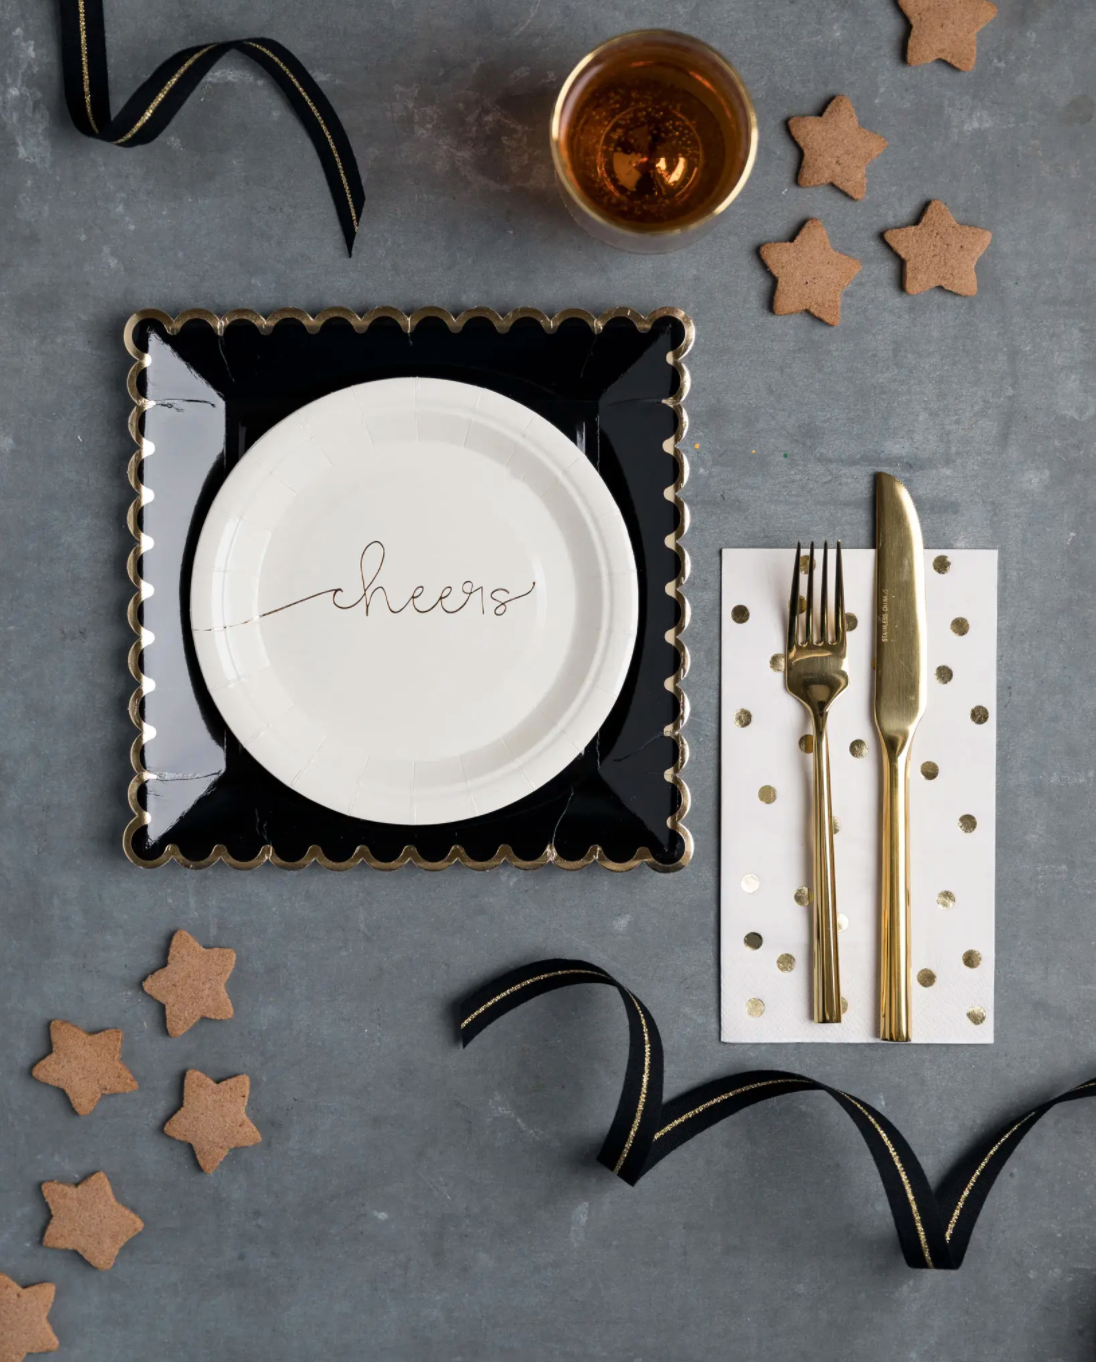 Black Square Plates with Gold Scalloped Edges - 9"